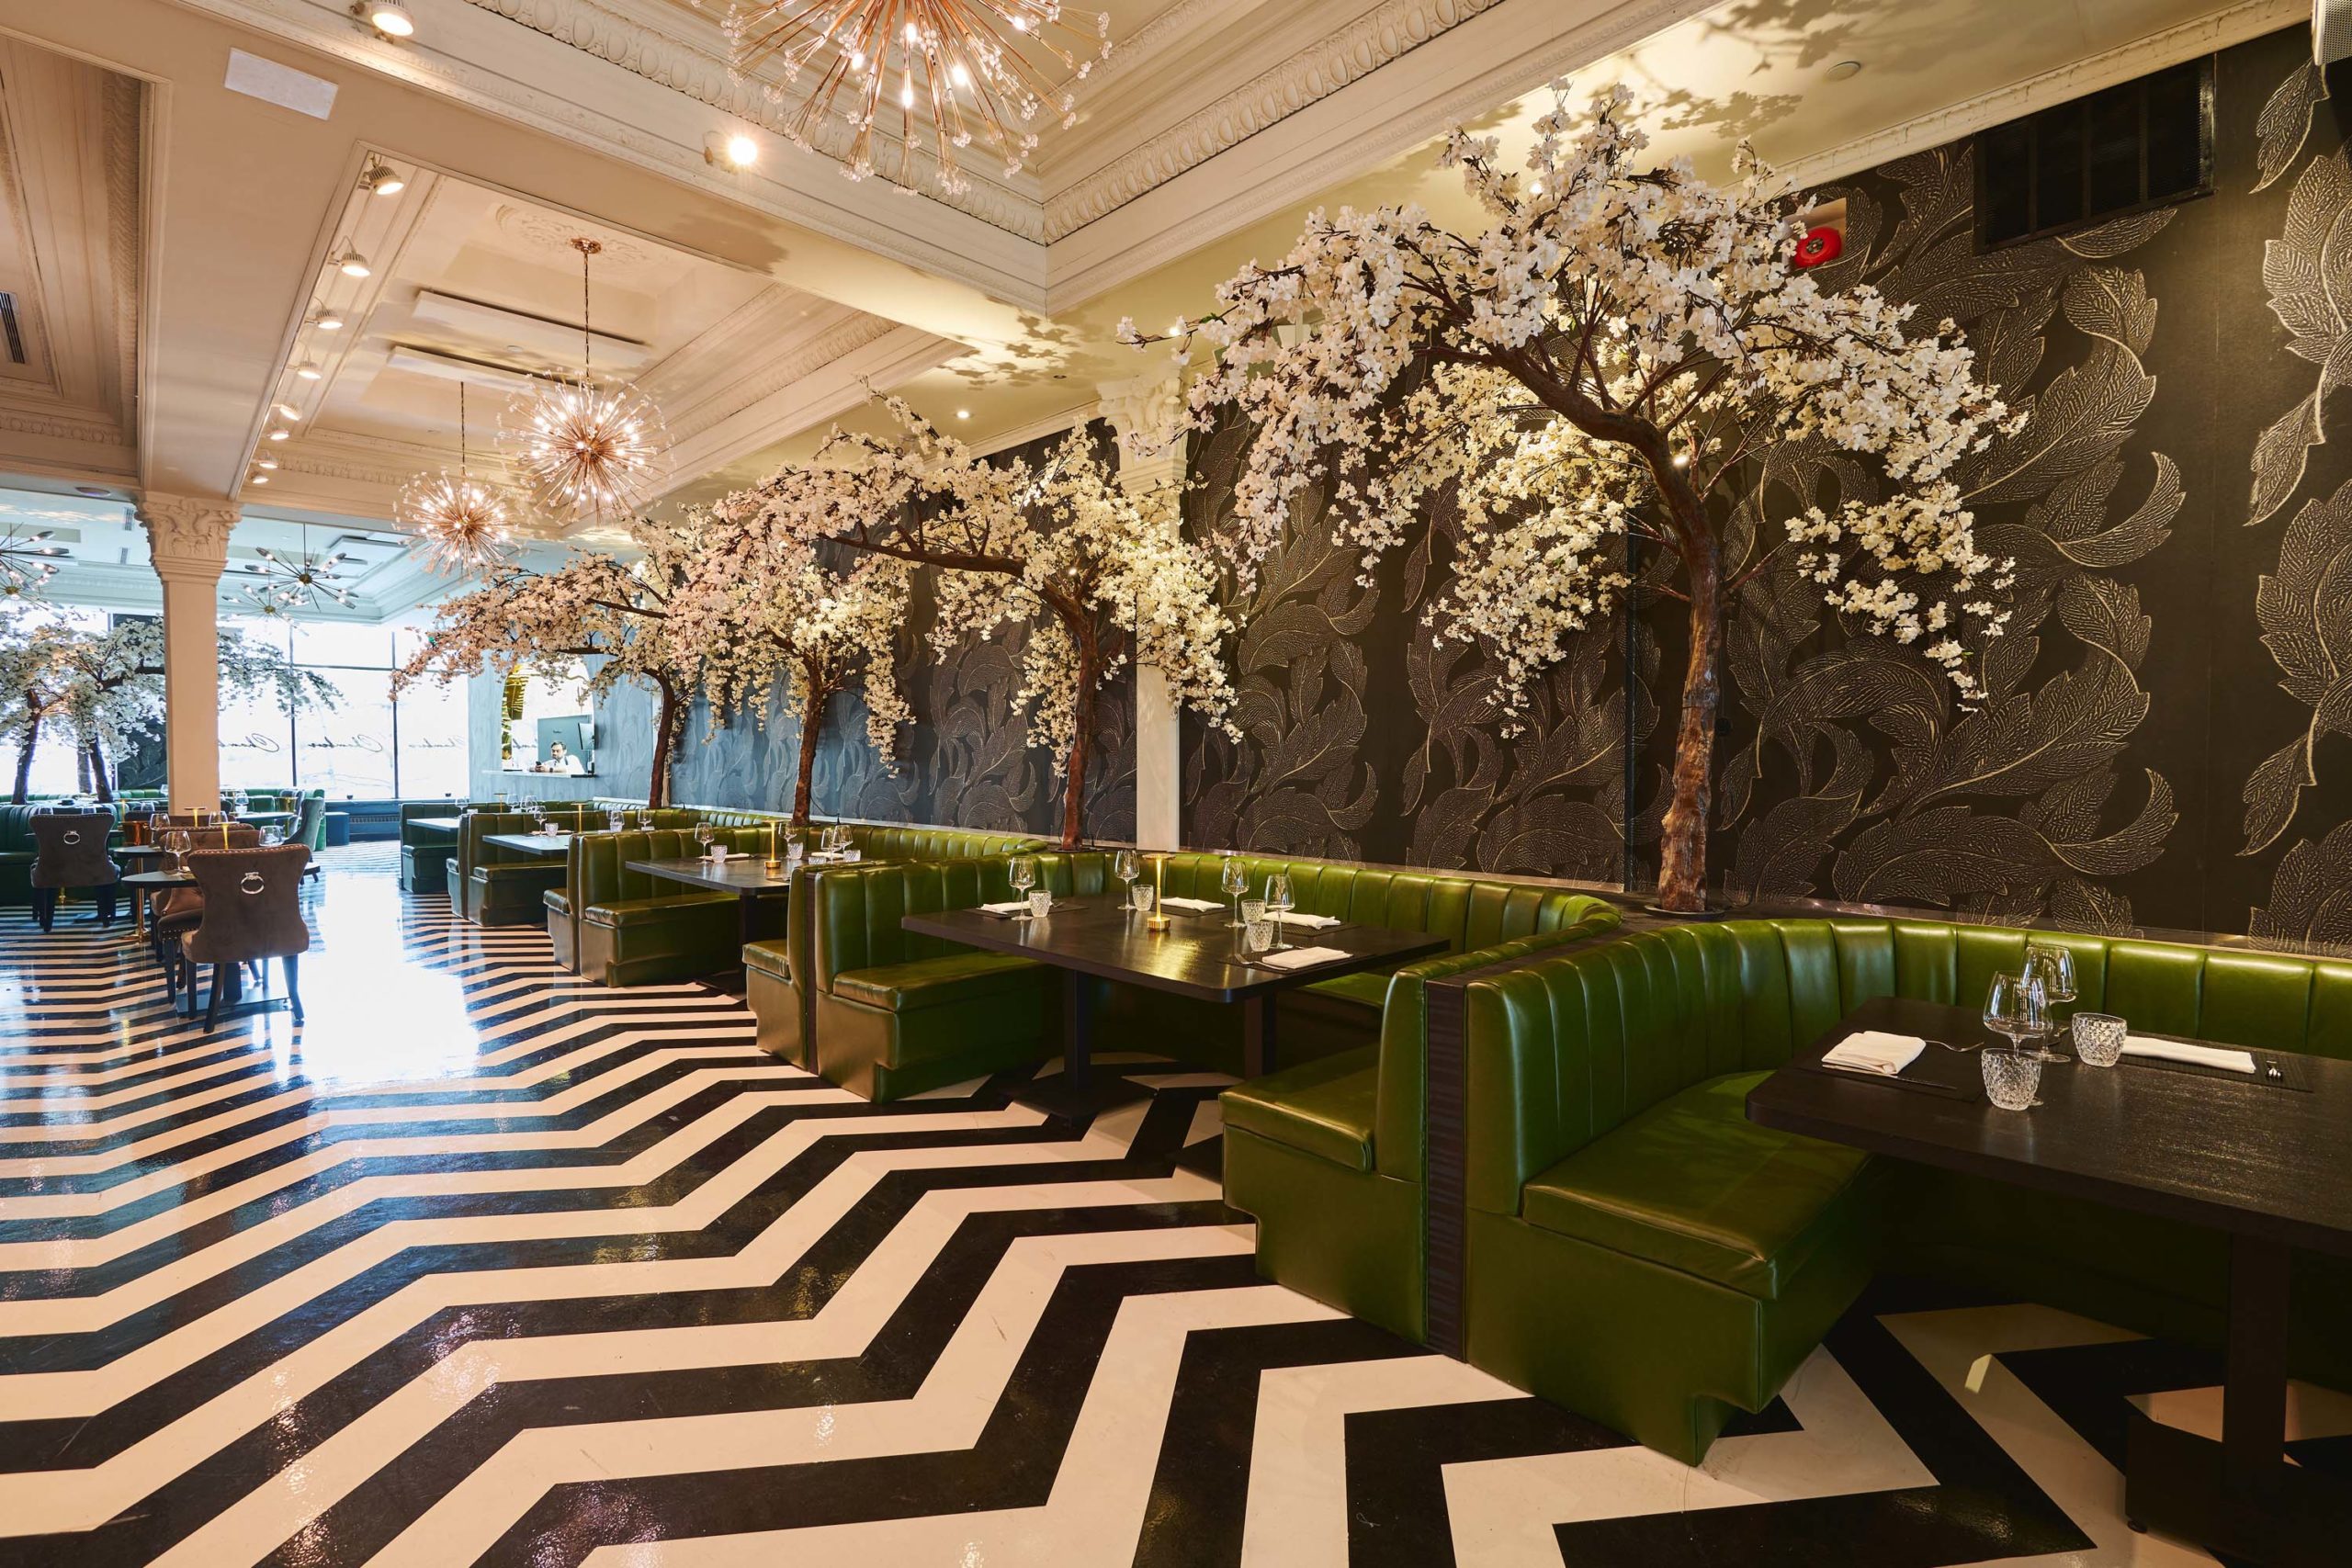 The dining room at Chambers, a fancy new steakhouse and supper club in Toronto, is furnished with green booths and decorated with artificial cherry blossom trees